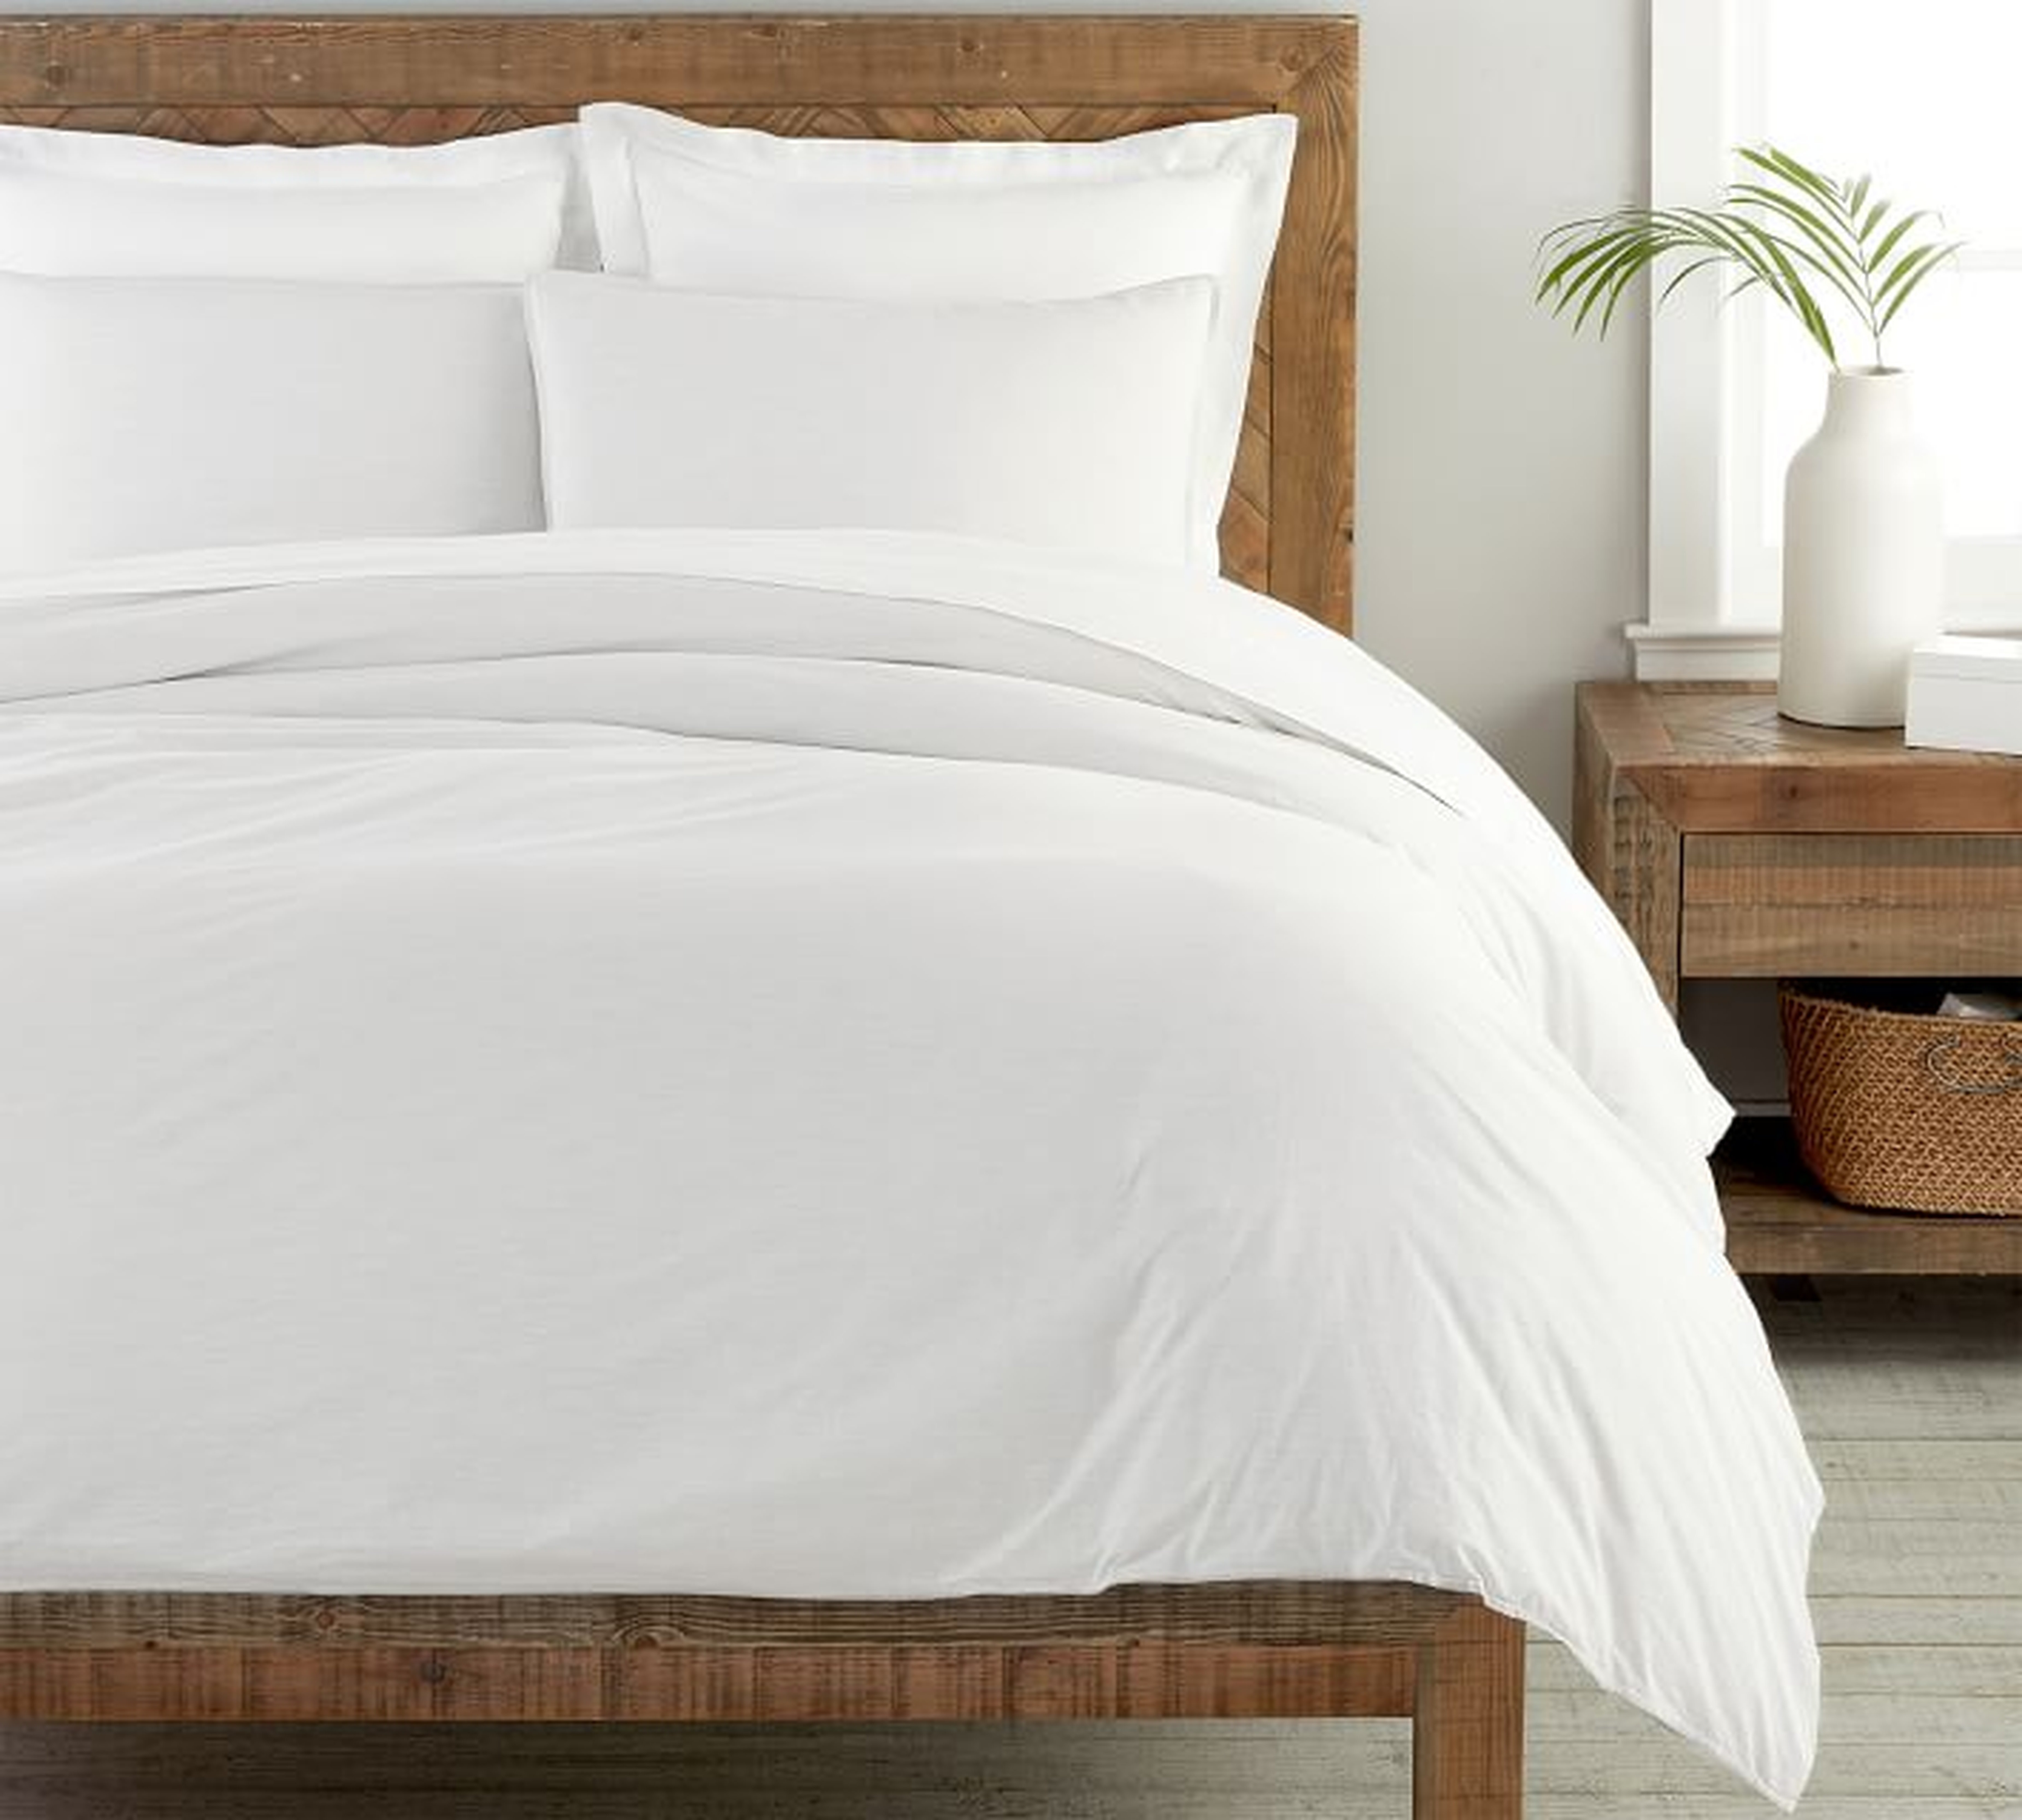 Soft Washed Organic Percale Duvet Cover, King/Cal. King, White - Pottery Barn